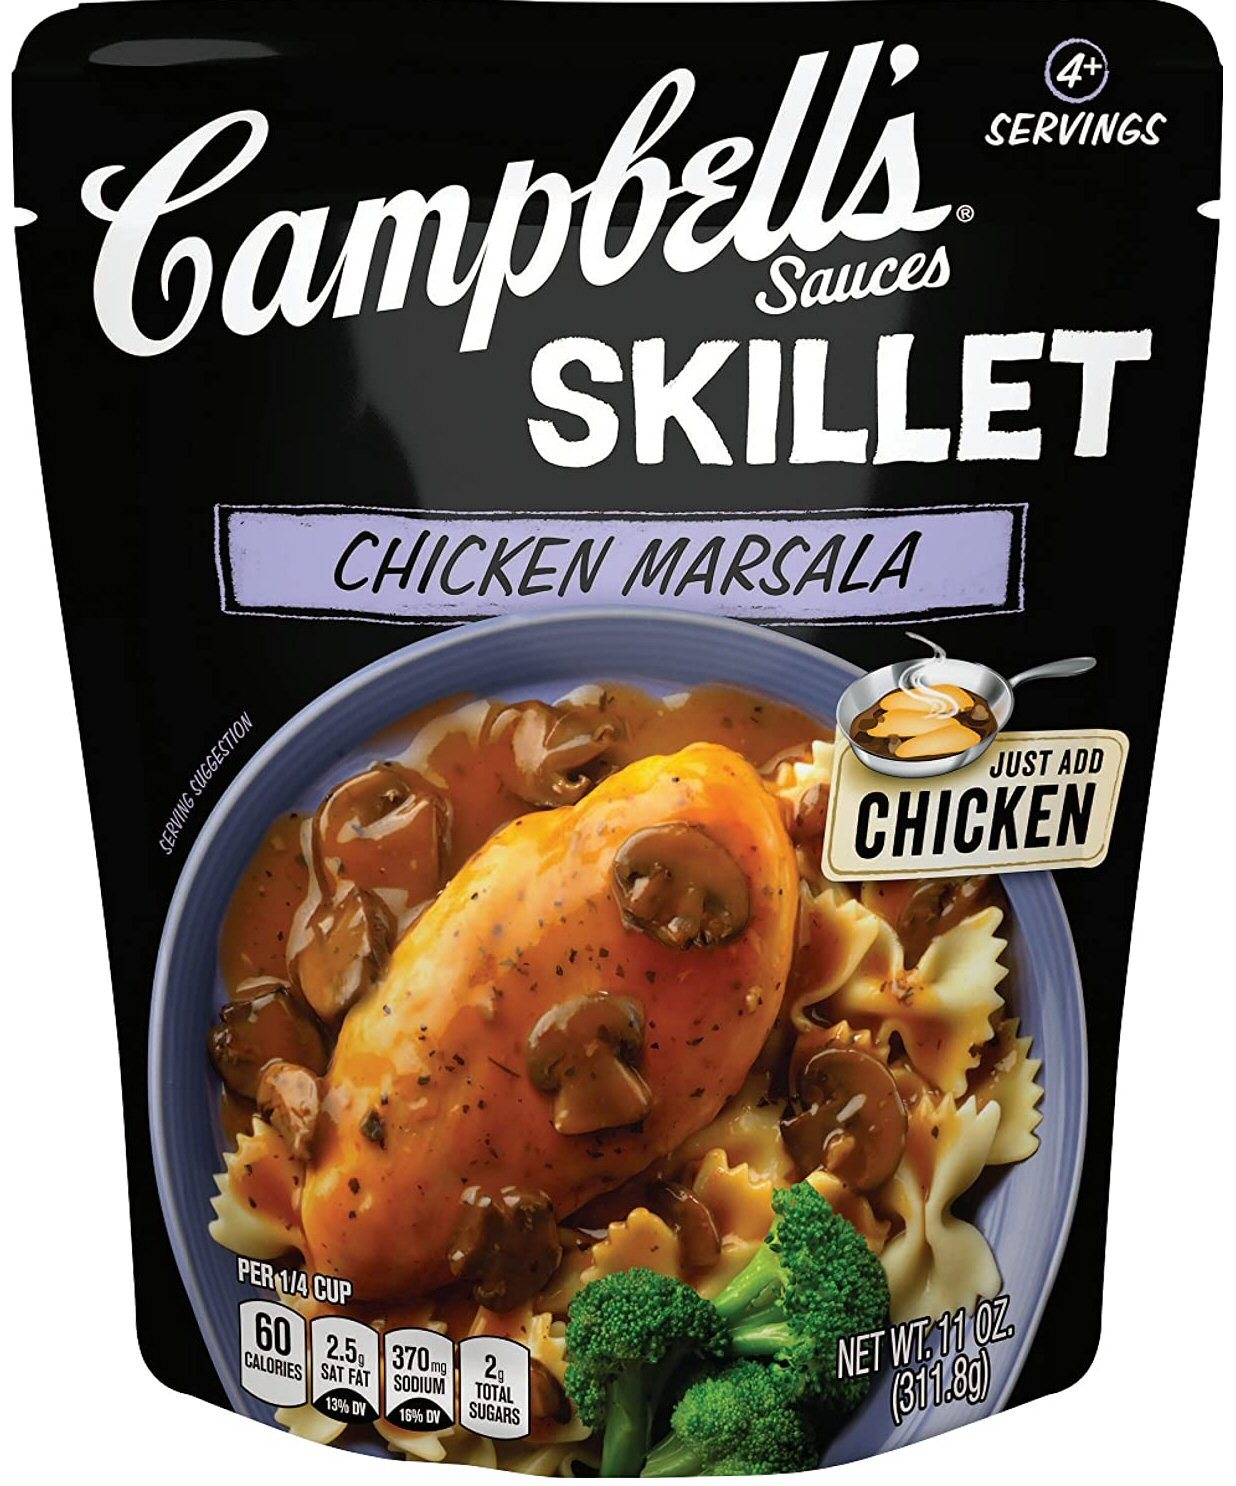 Primary image for Campbell's Skillet Sauces  -  Chicken Marsala - 11oz